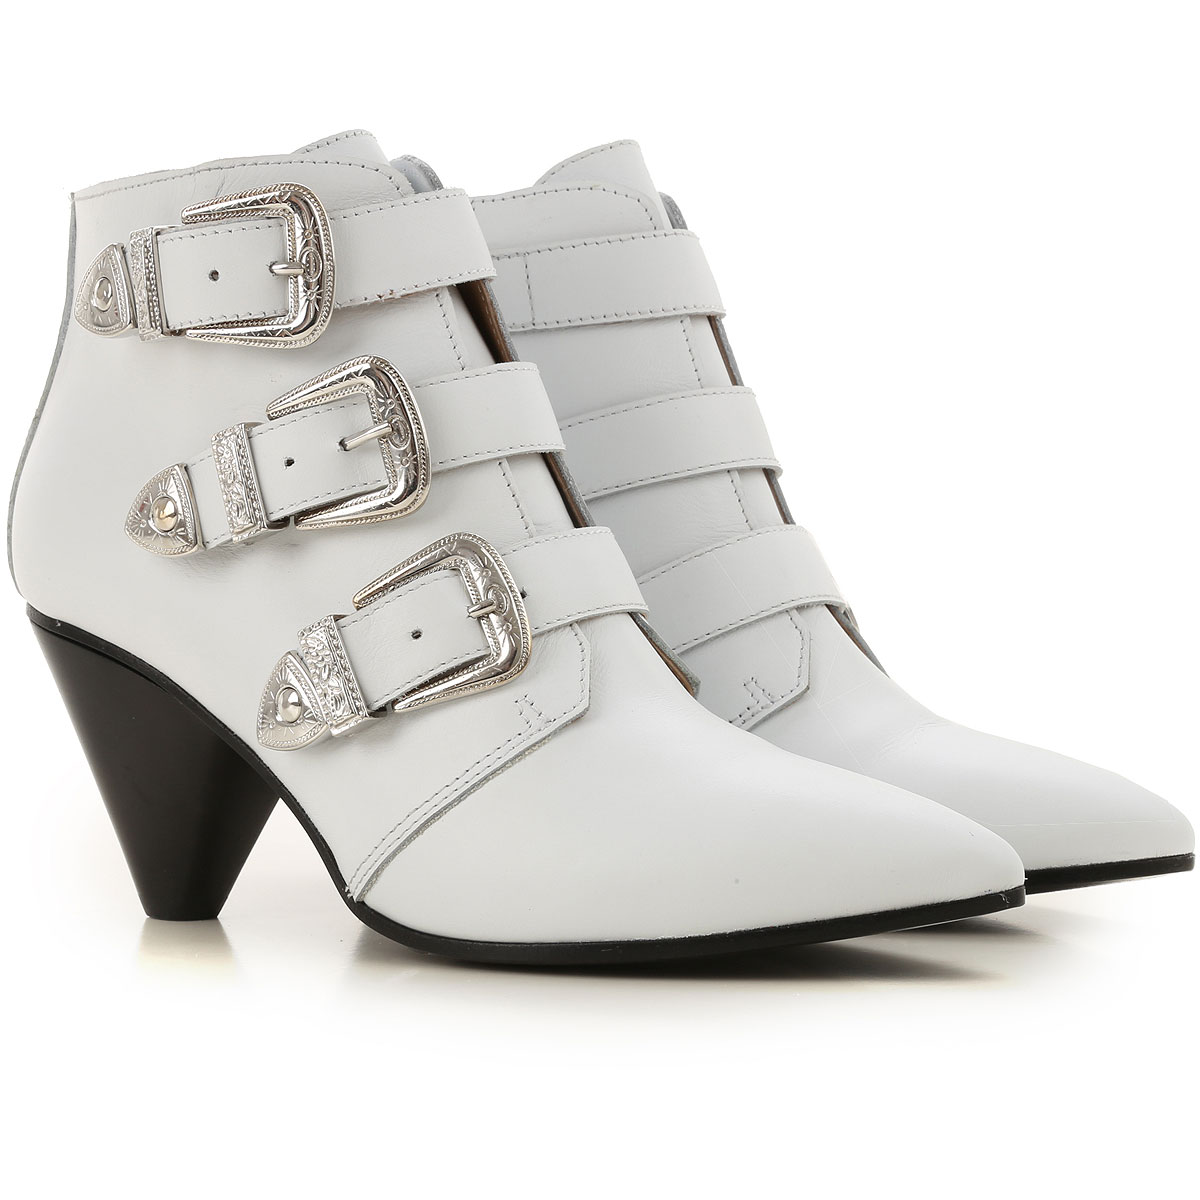 Womens Shoes Janet & Janet, Style code: 43656-bianco-